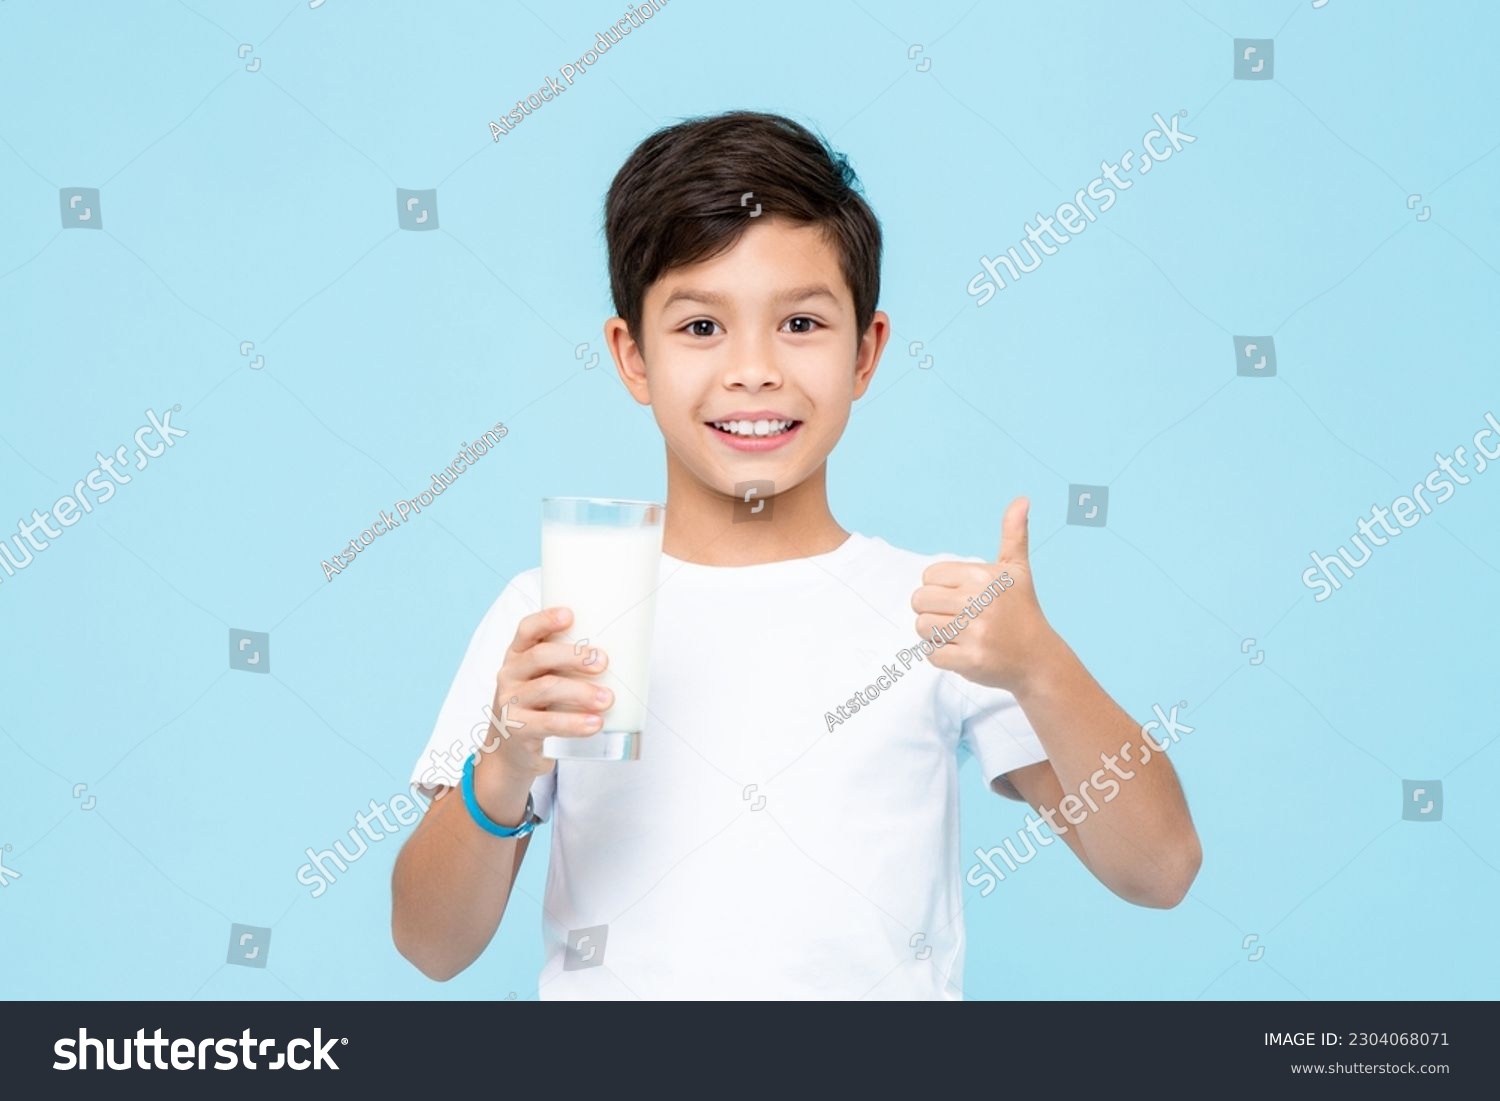 Happy smiling mixed race Asian kid boy holding a glass of fresh milk and giving thumbs up in isolated light blue color background studio shot #2304068071